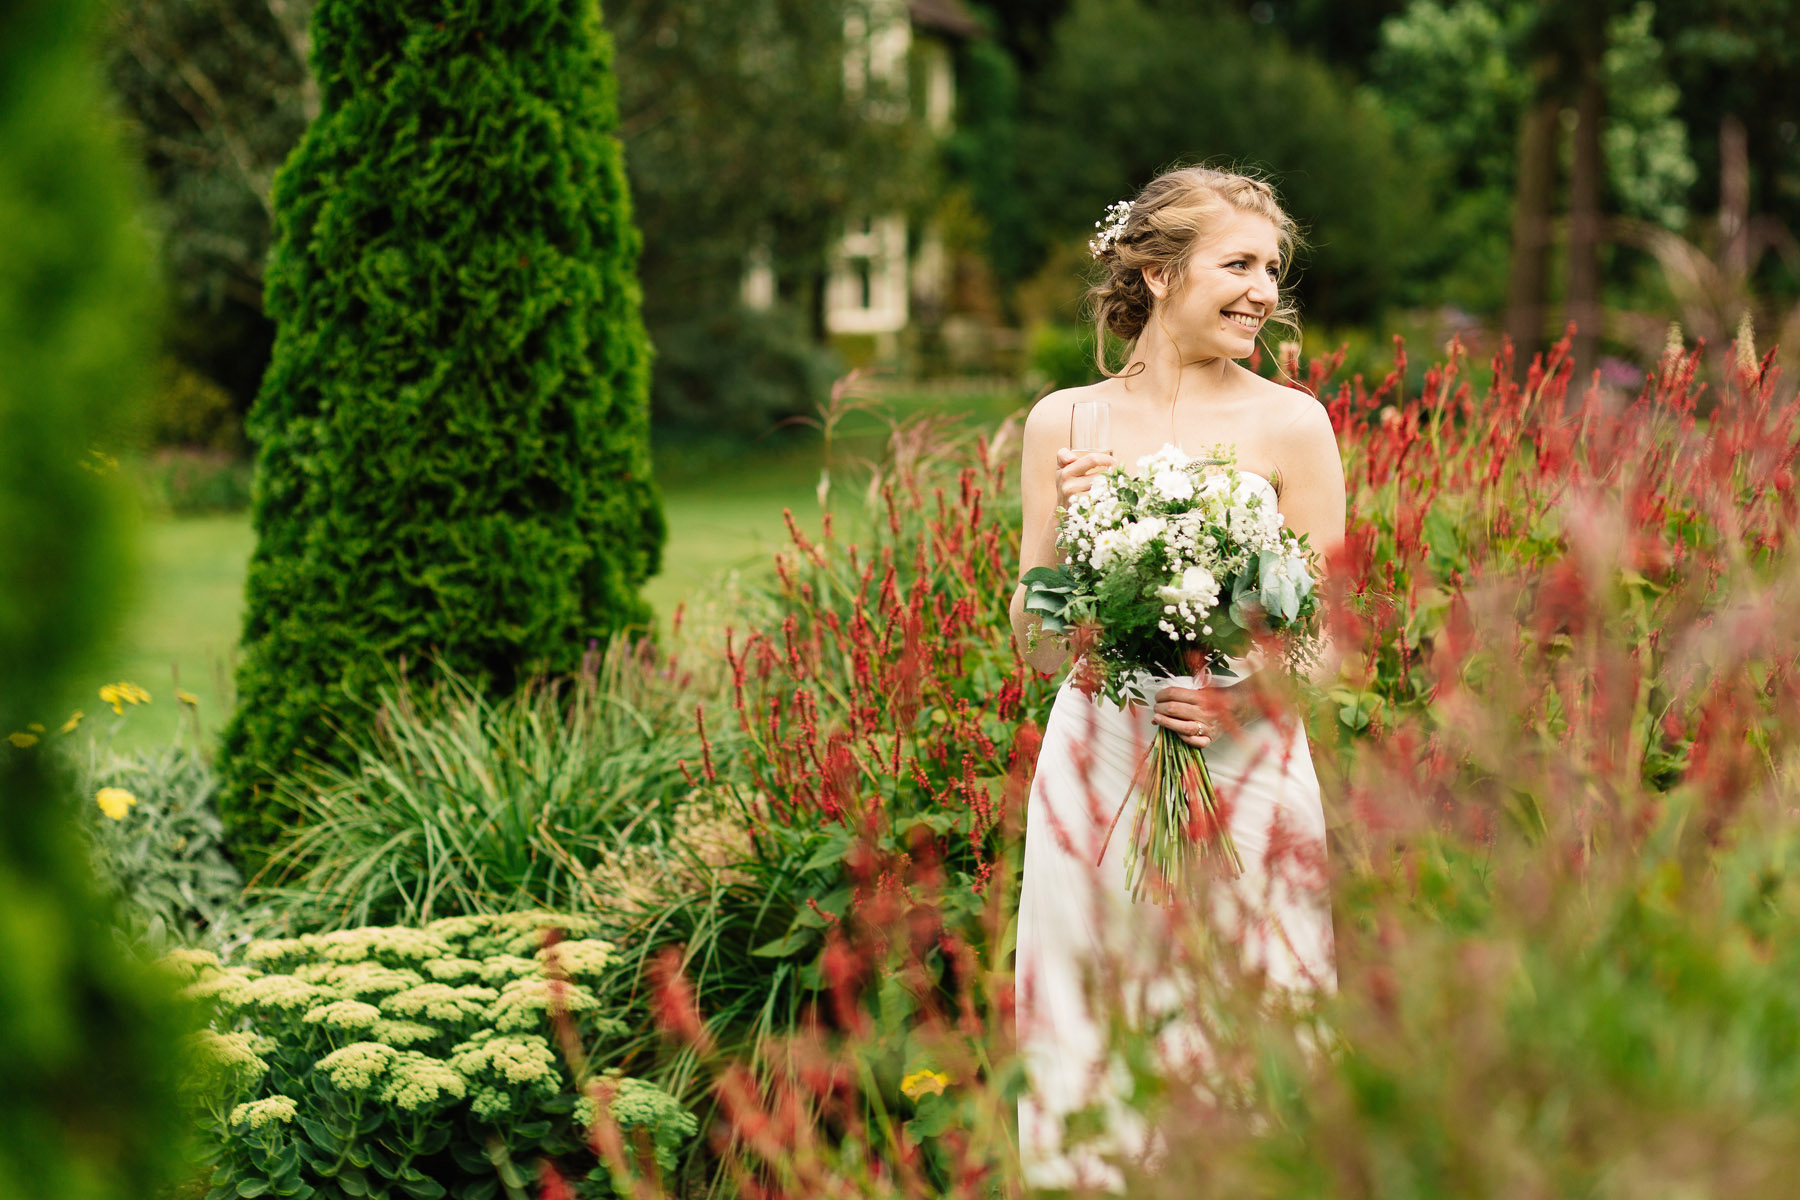 Holly + Tom's chilled out wedding photography at Abbeywood estate and gardens in Cheshire.